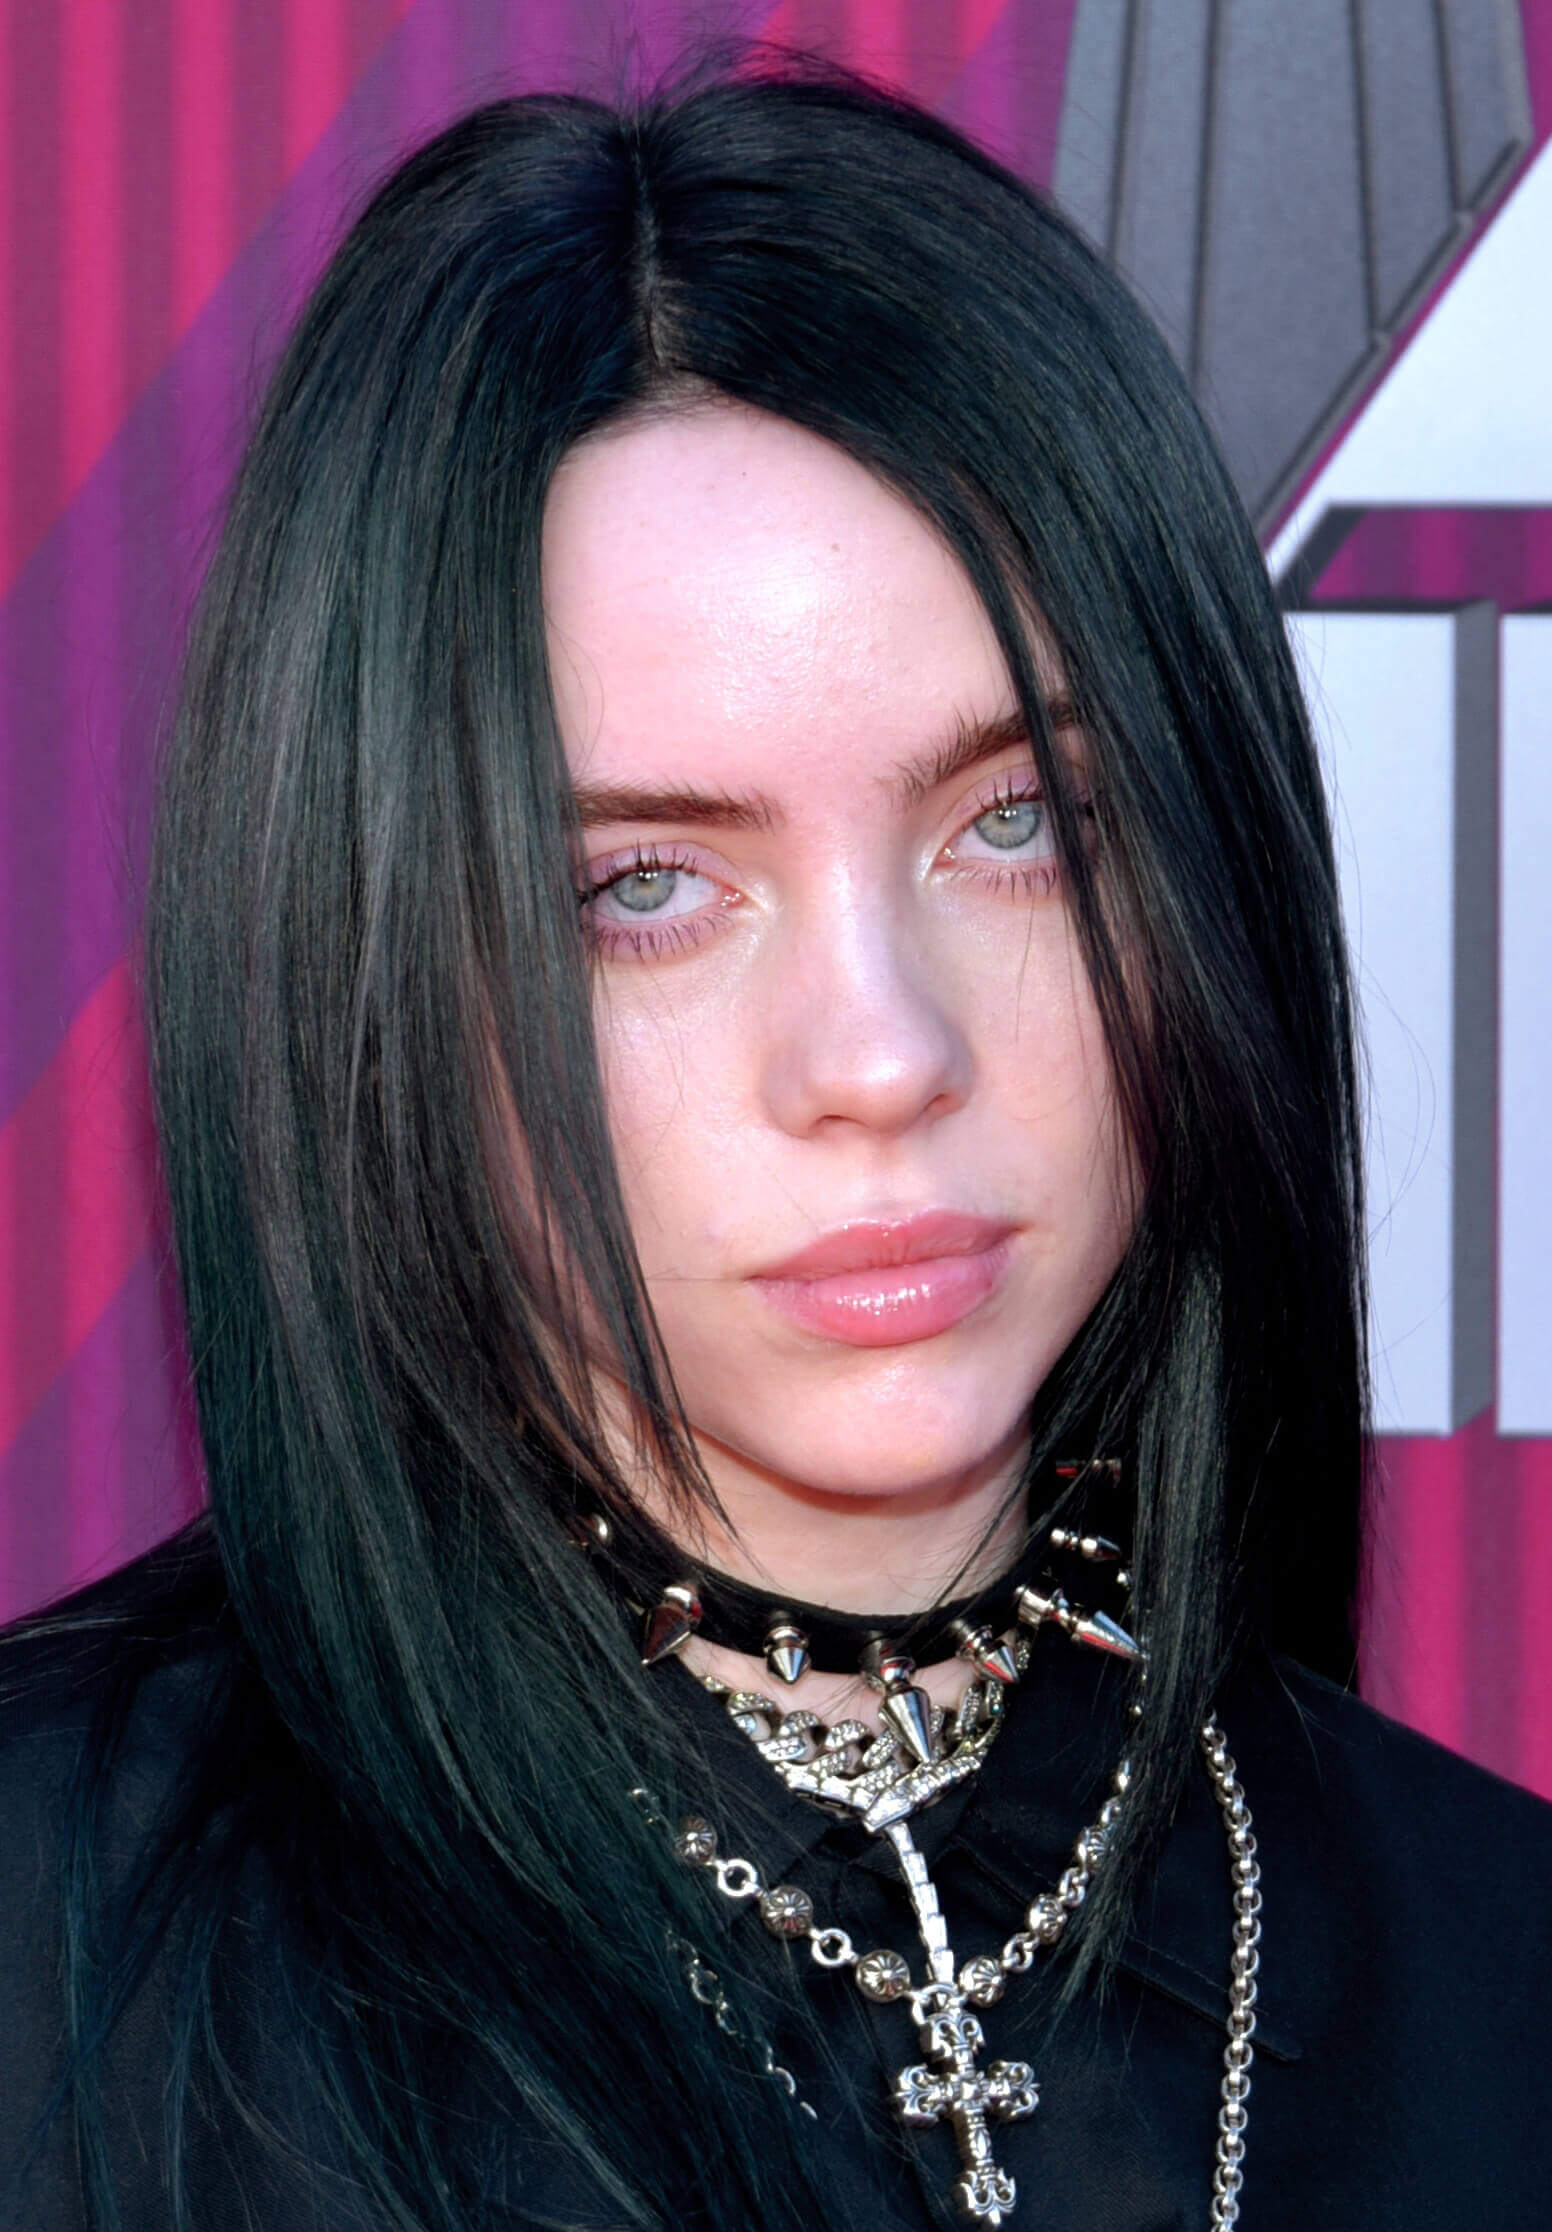 11 Billie Eilish Quotes You Must Hear in 2022